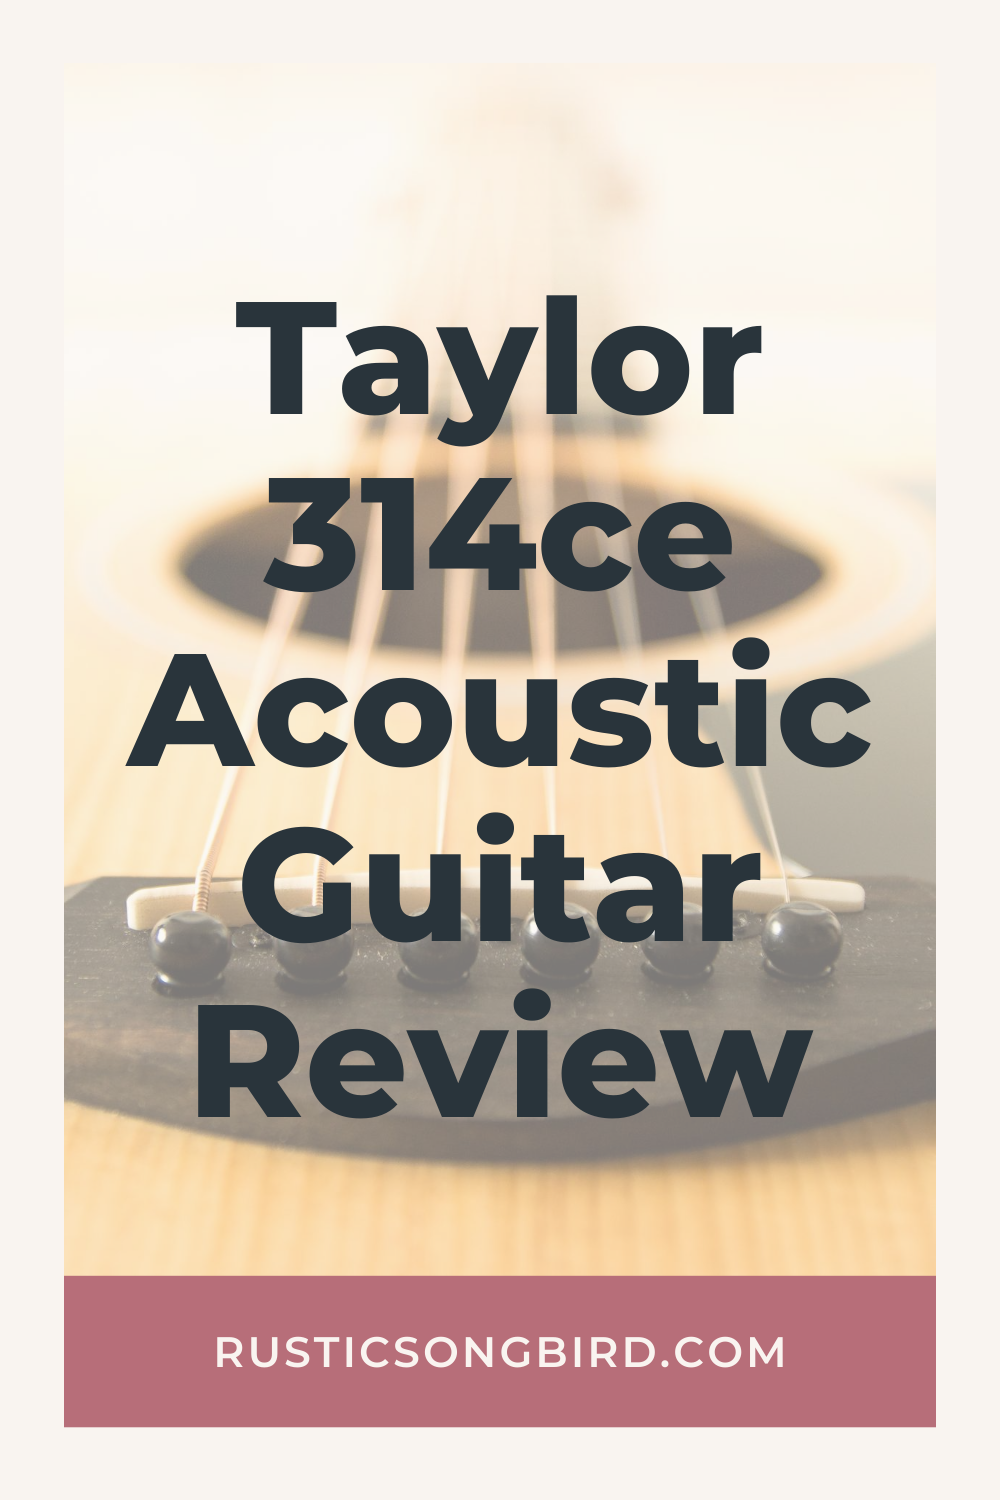 acoustic guitar in the background and text for the title of the blog post called "Taylor 314ce Acoustic Guitar Review"